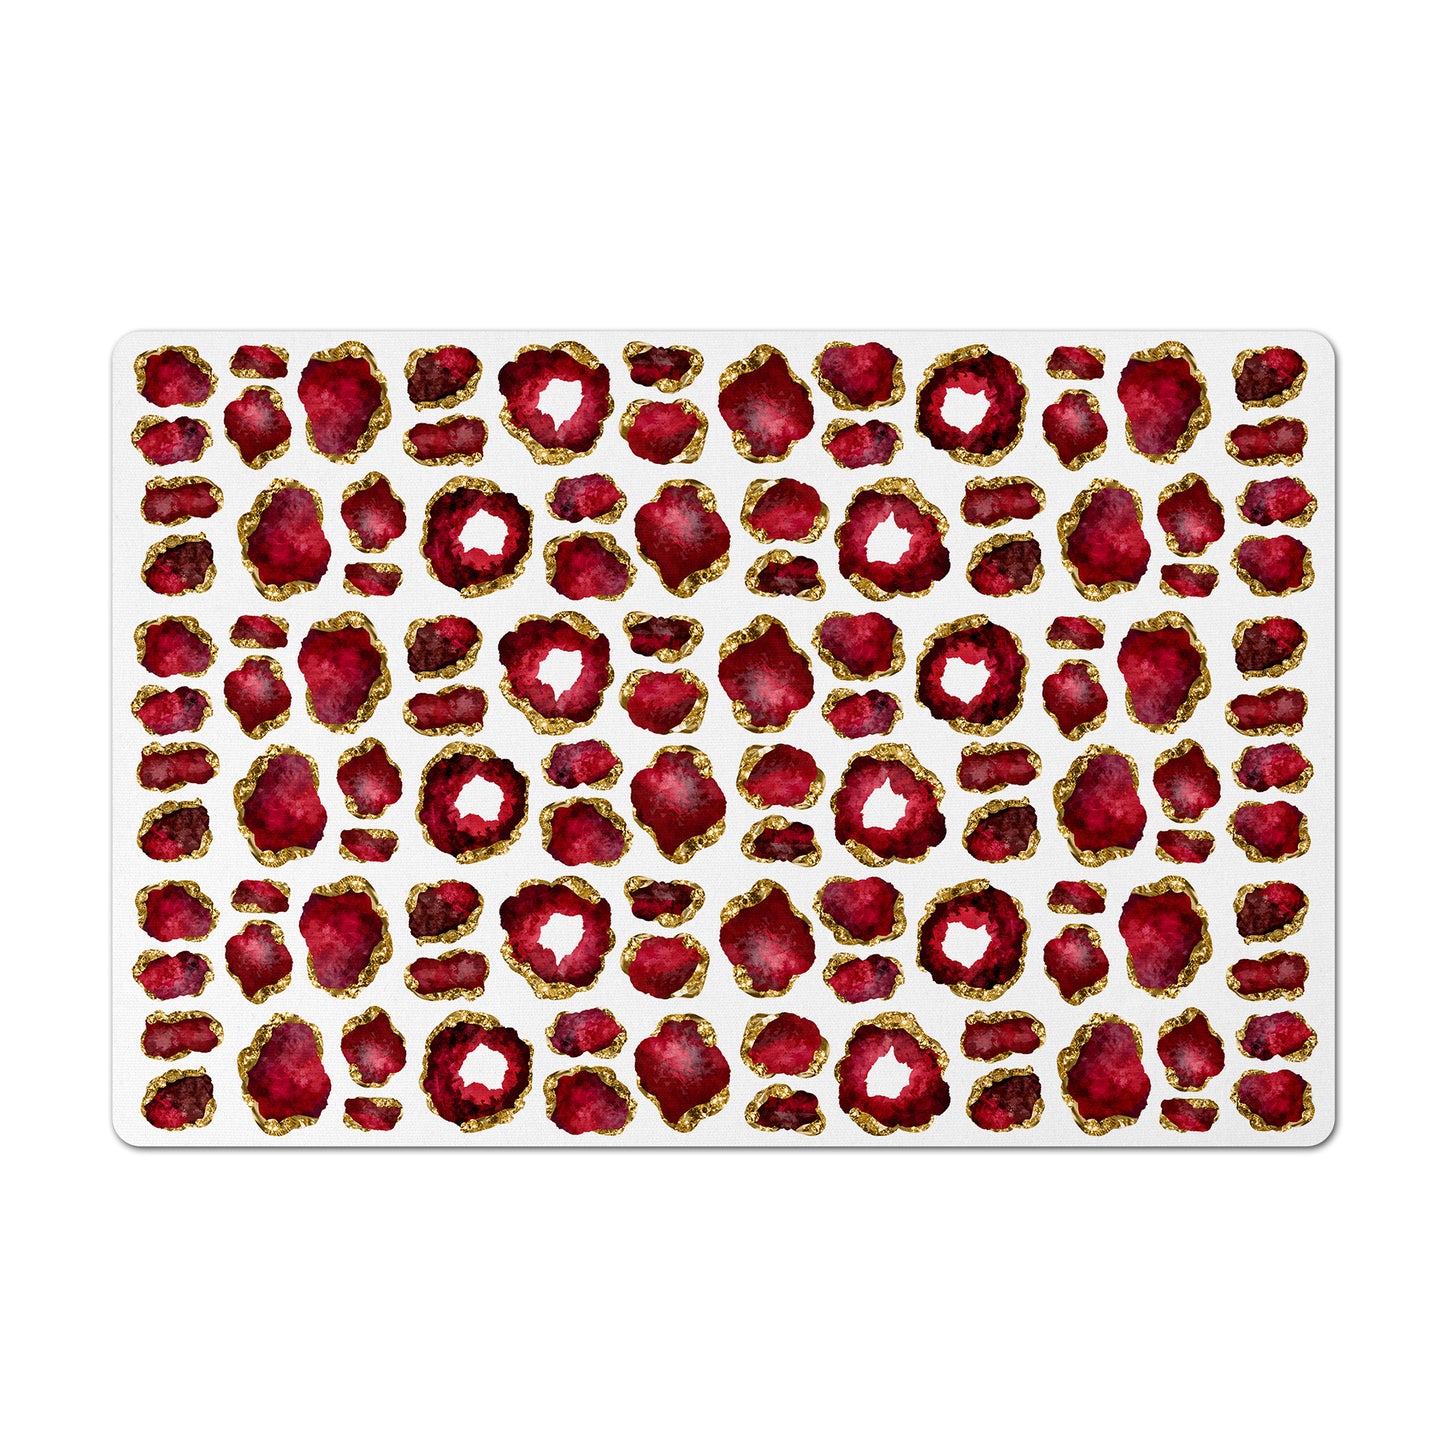 Pet Feeding Mat, Jewel Encrusted, Ruby Red and Gold